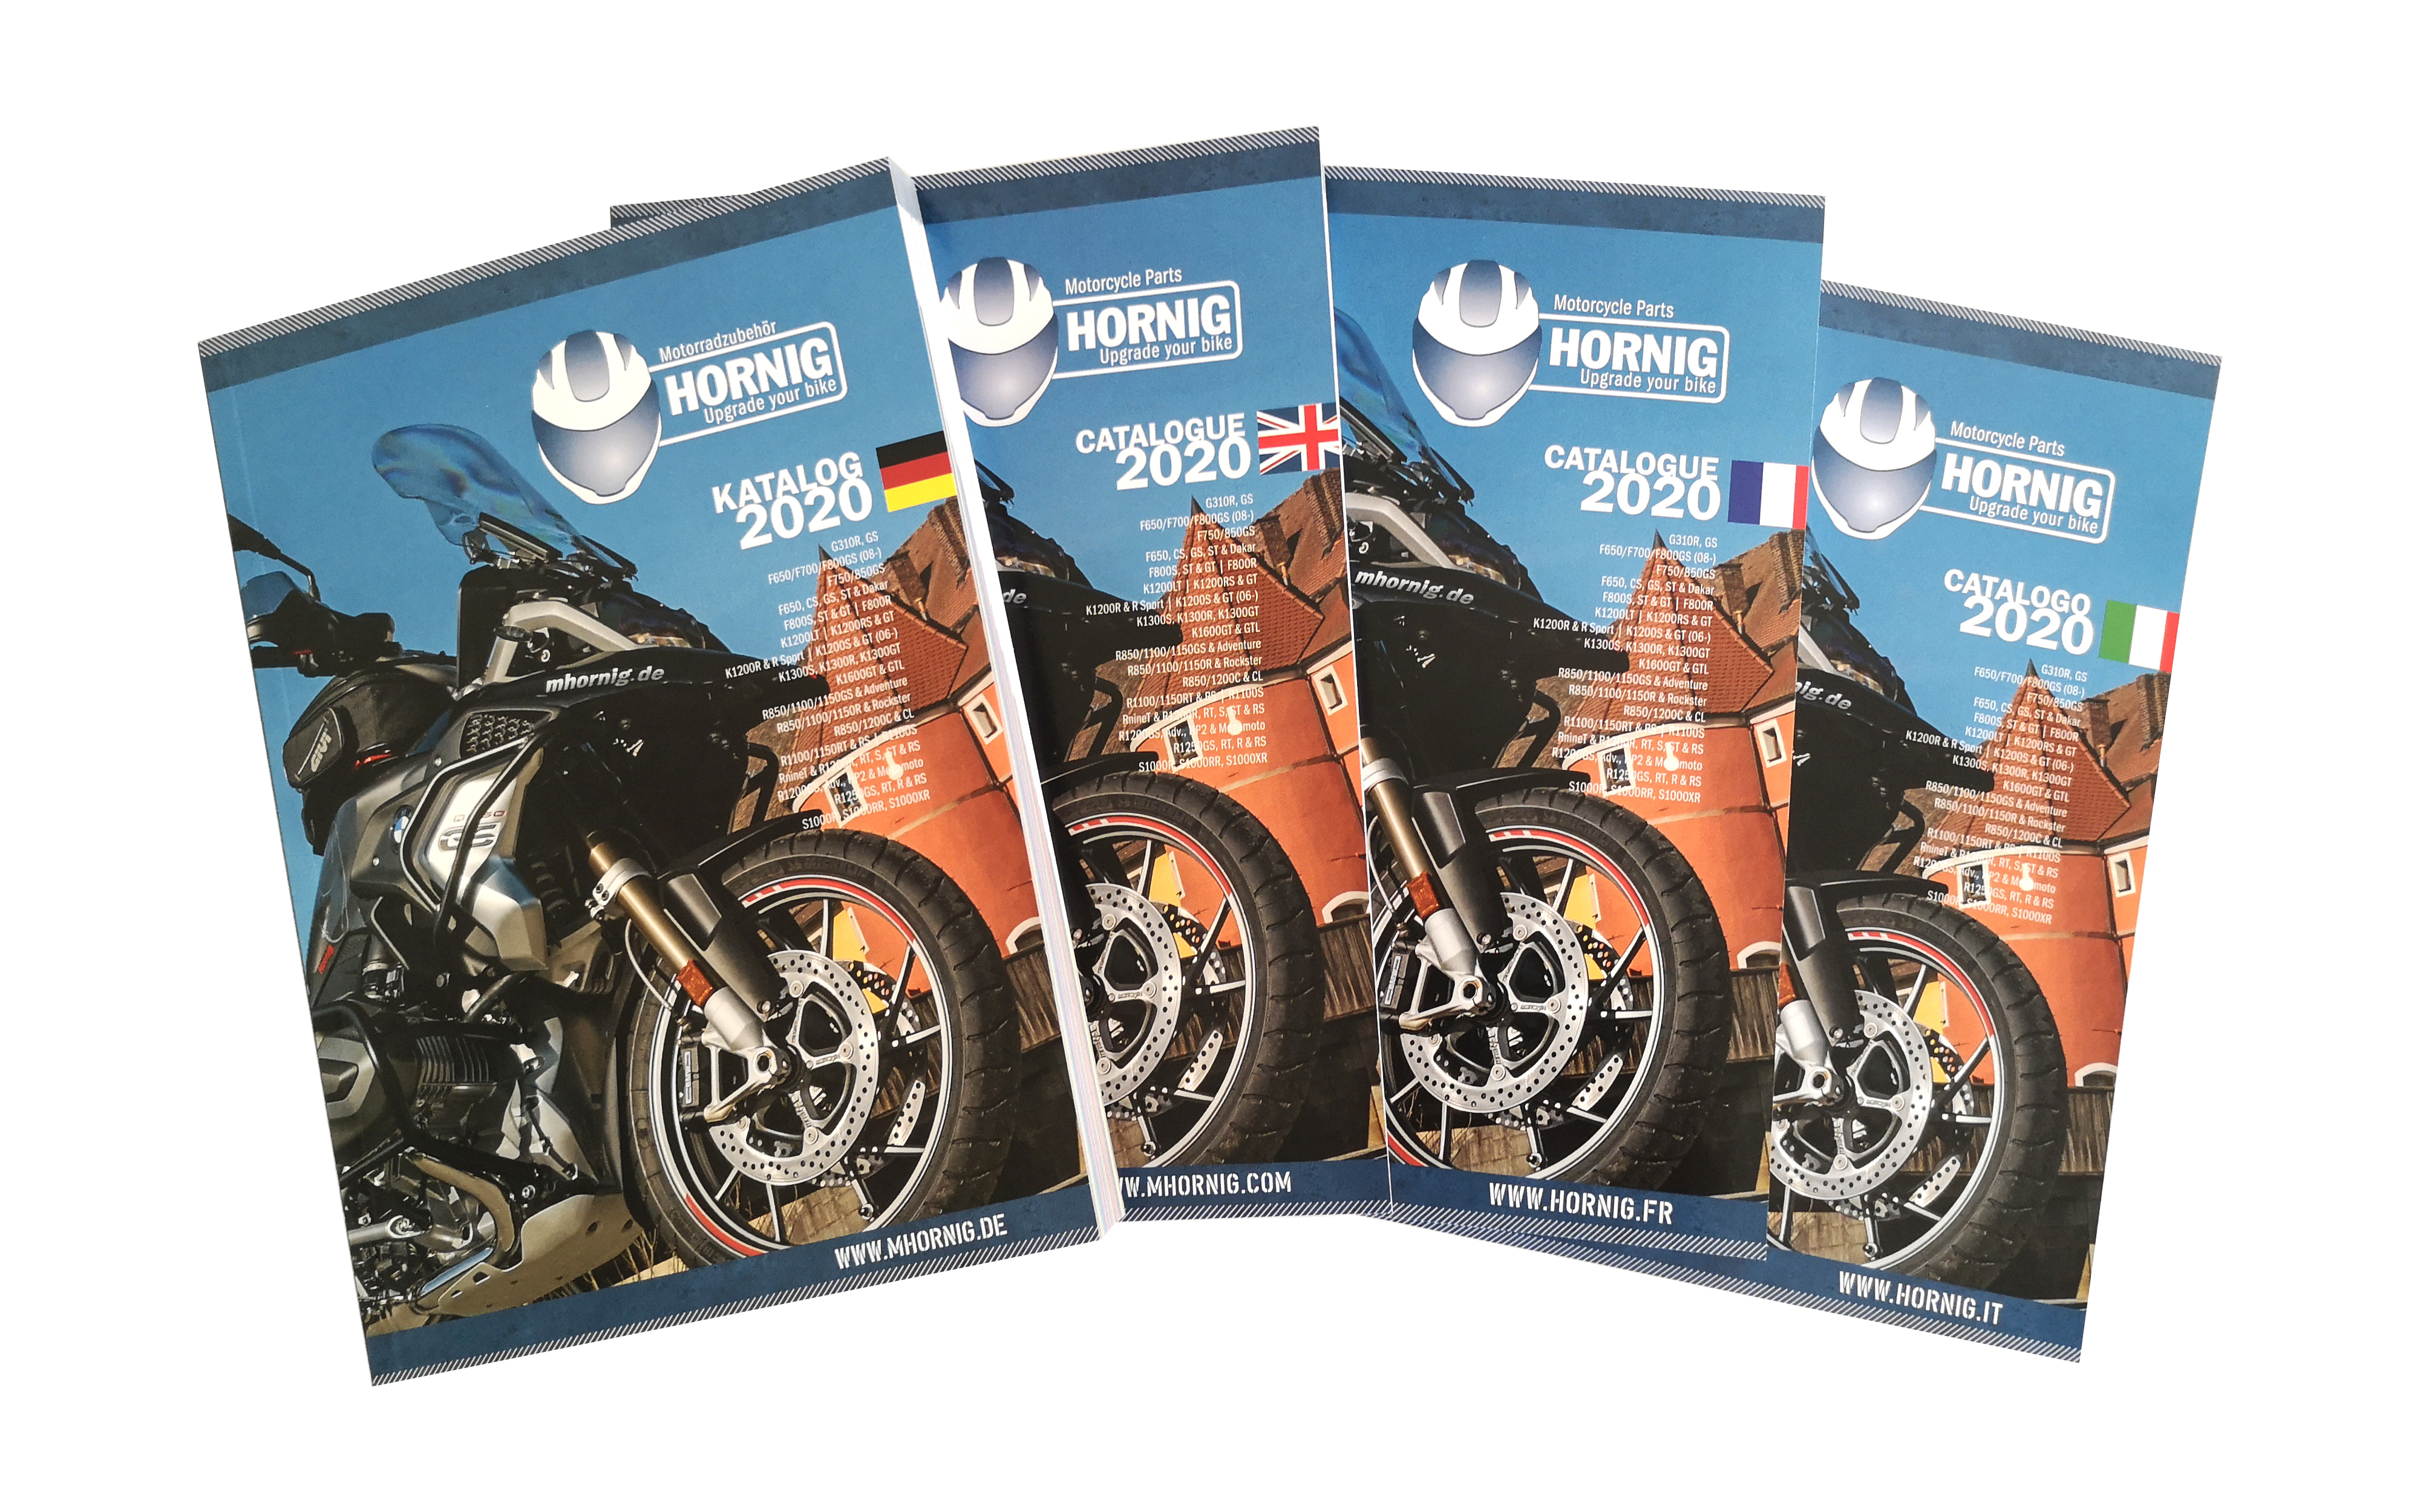 New BMW motorcycle accessory catalogue 2020 by Hornig ready for